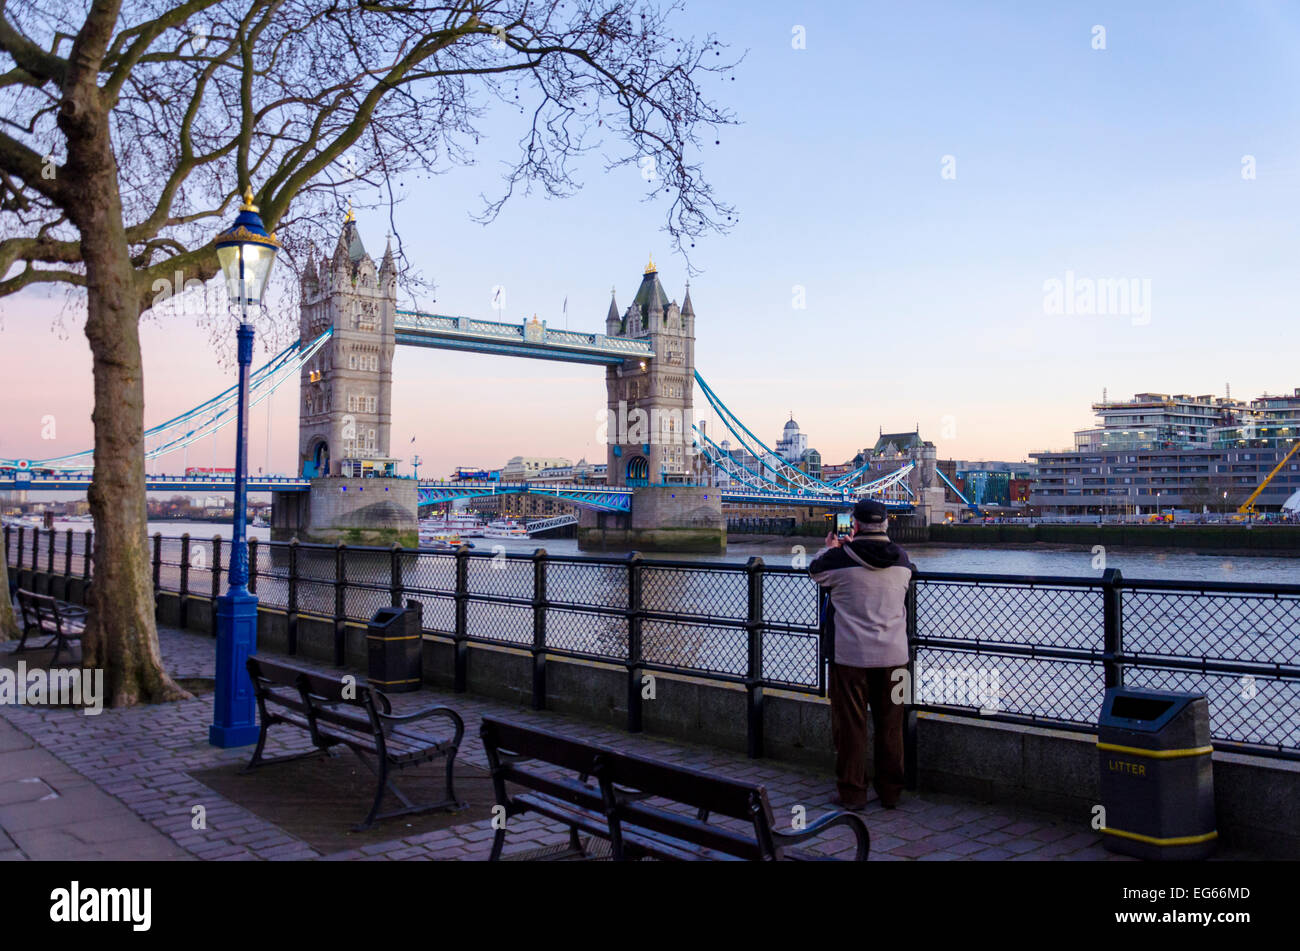 London, UK 17th February 2015: A clear evening sky over the capital will mean that overnight temperatures could drop below freezing. Stock Photo